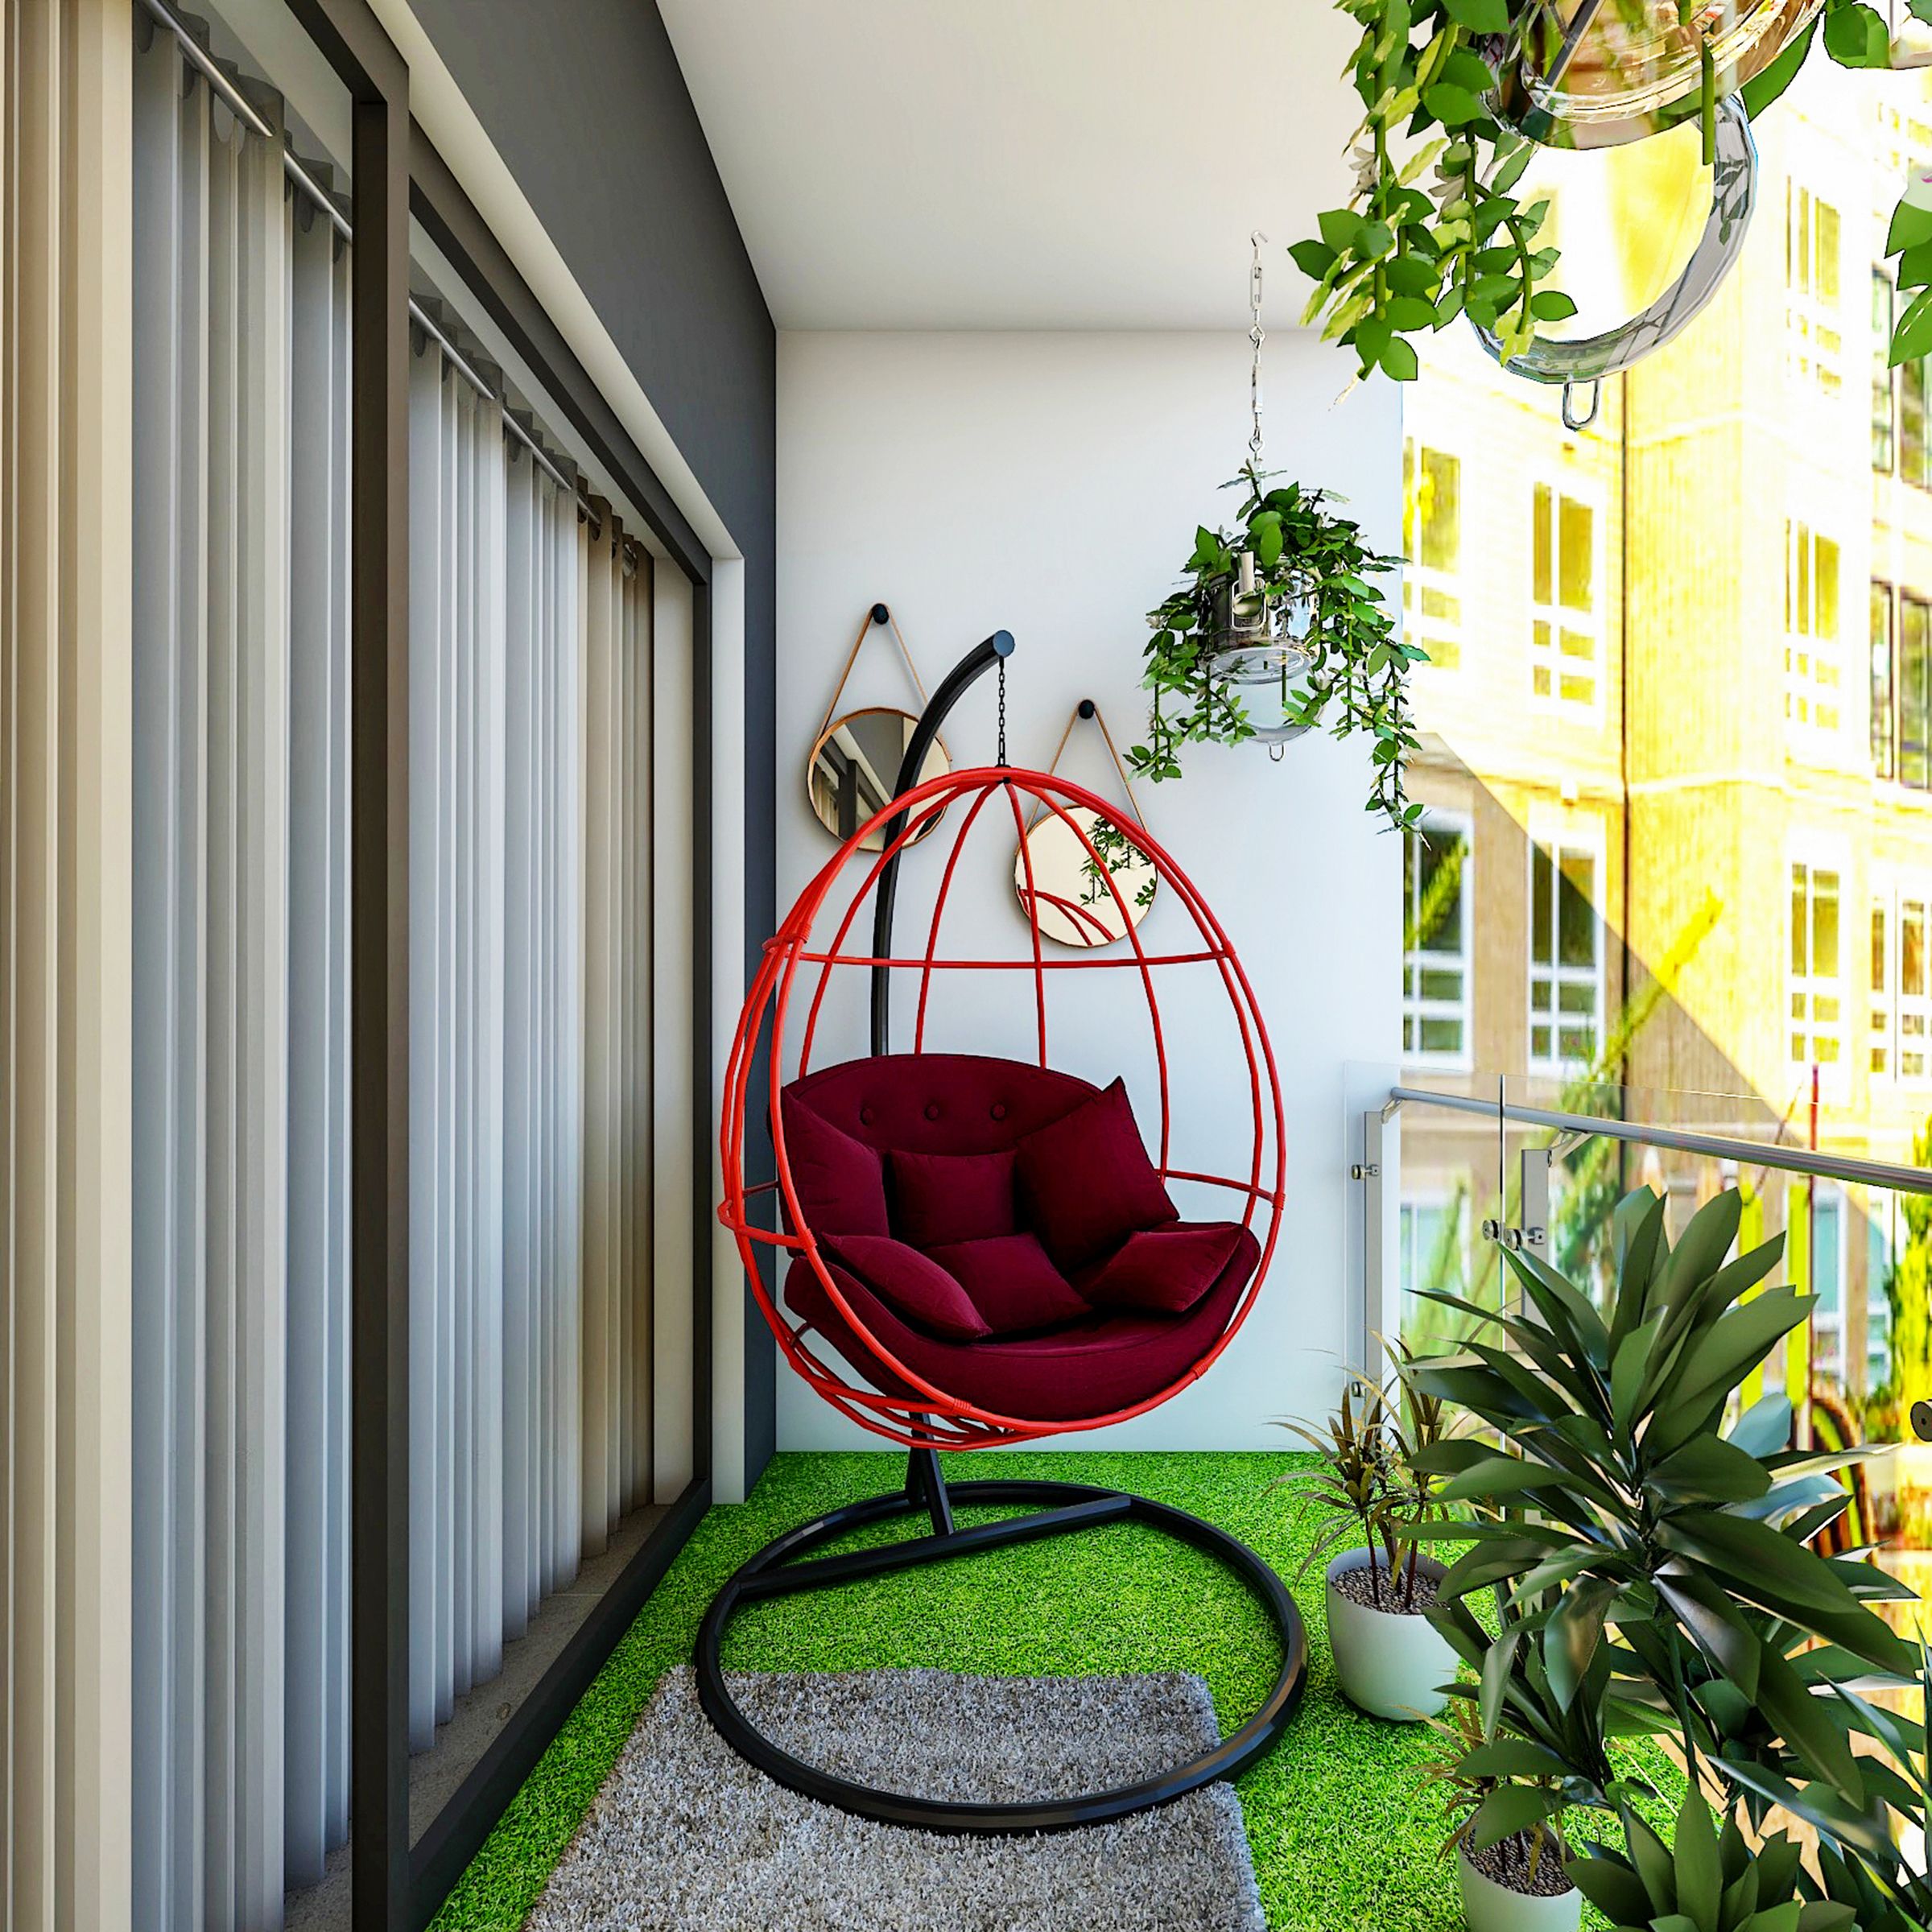 Compact Balcony Design with Red Swing Chair with Planters